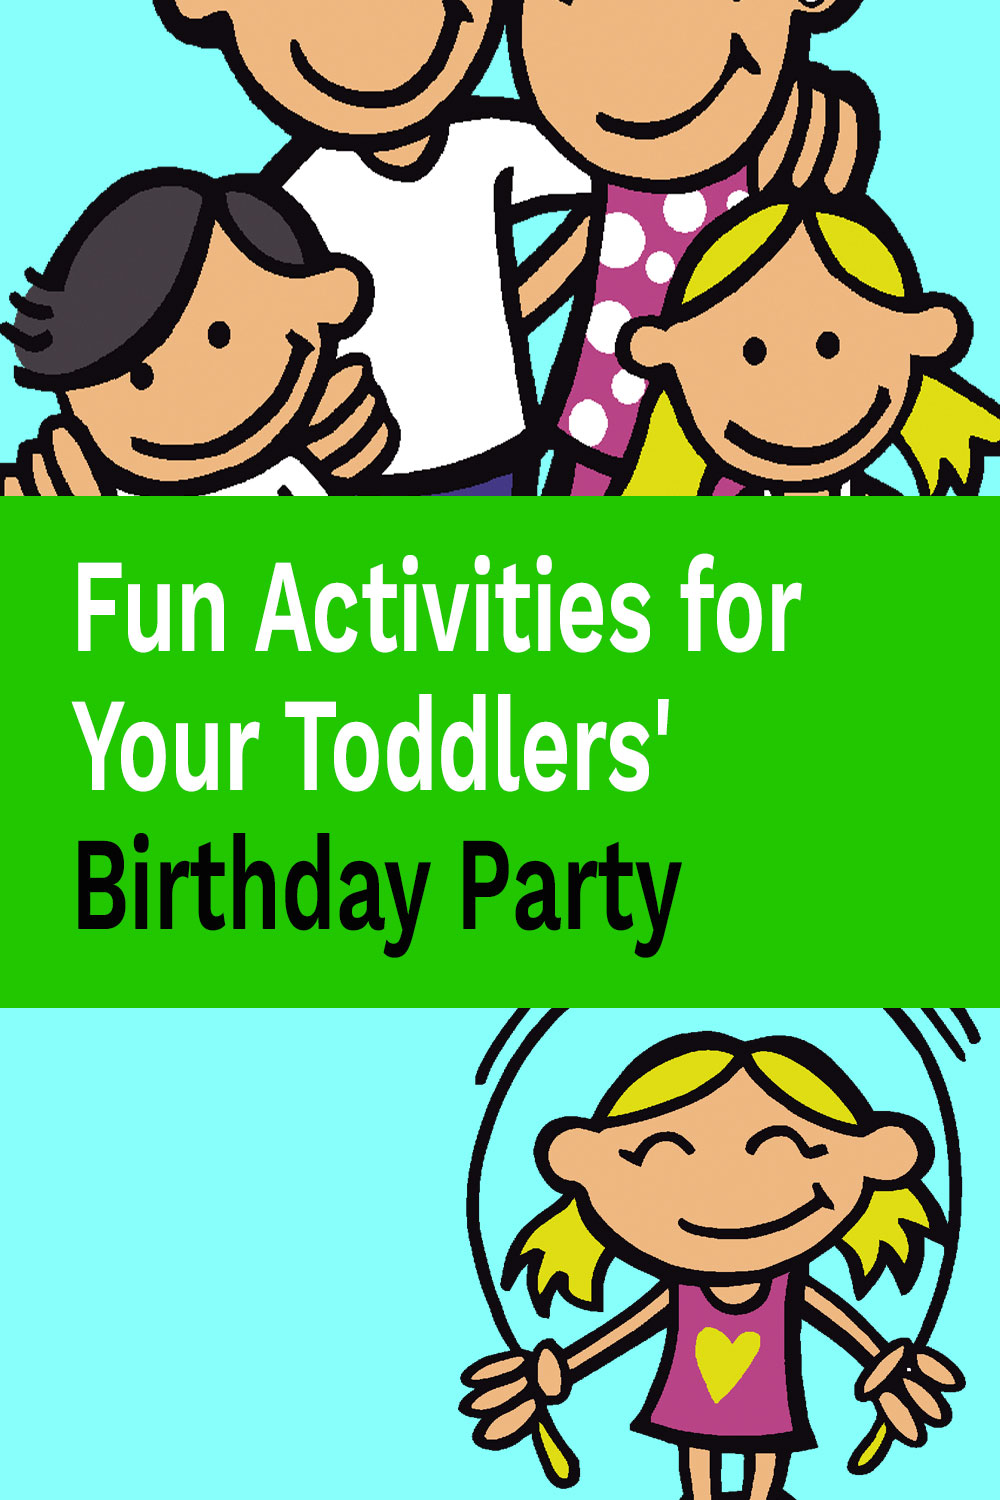 Fun Activities for Your Toddlers' Birthday Party